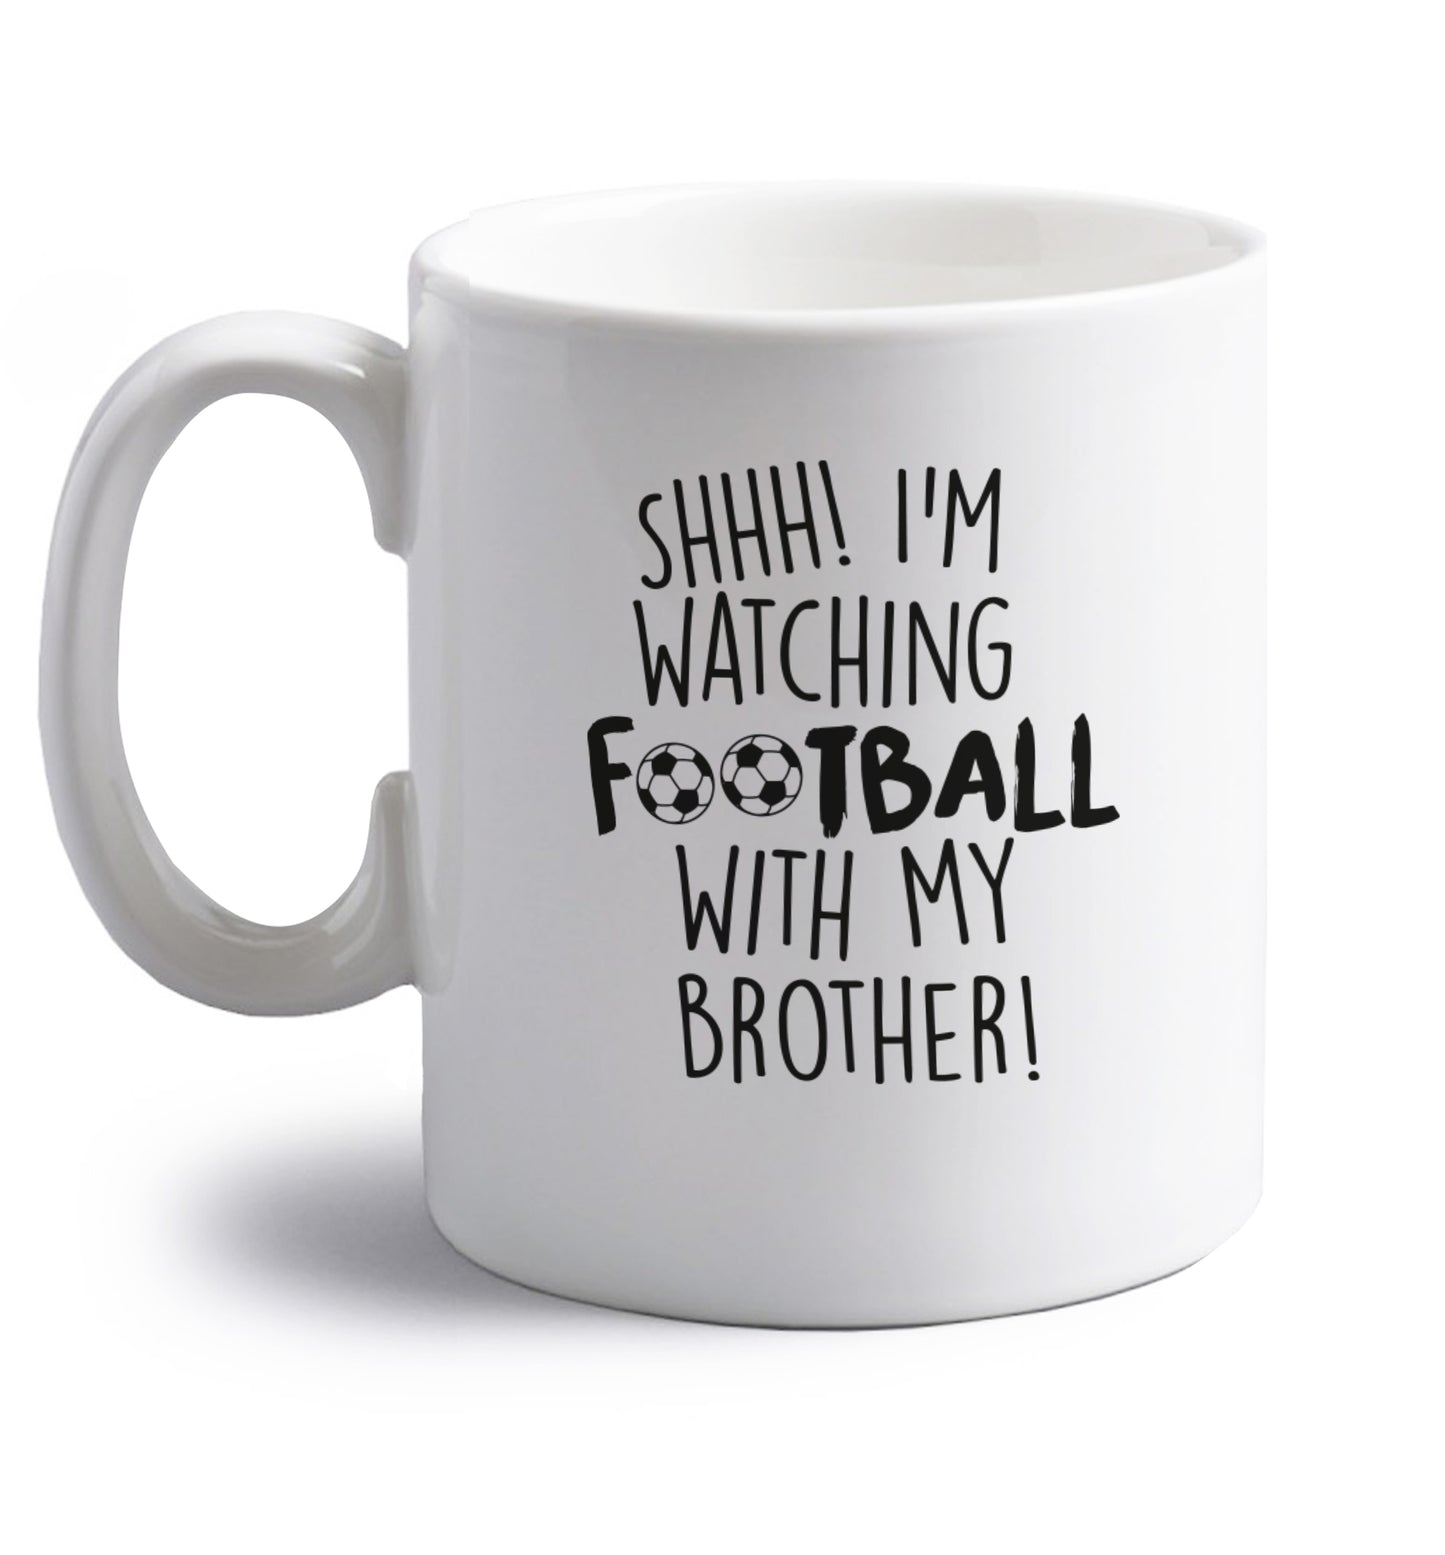 Shhh I'm watching football with my brother right handed white ceramic mug 